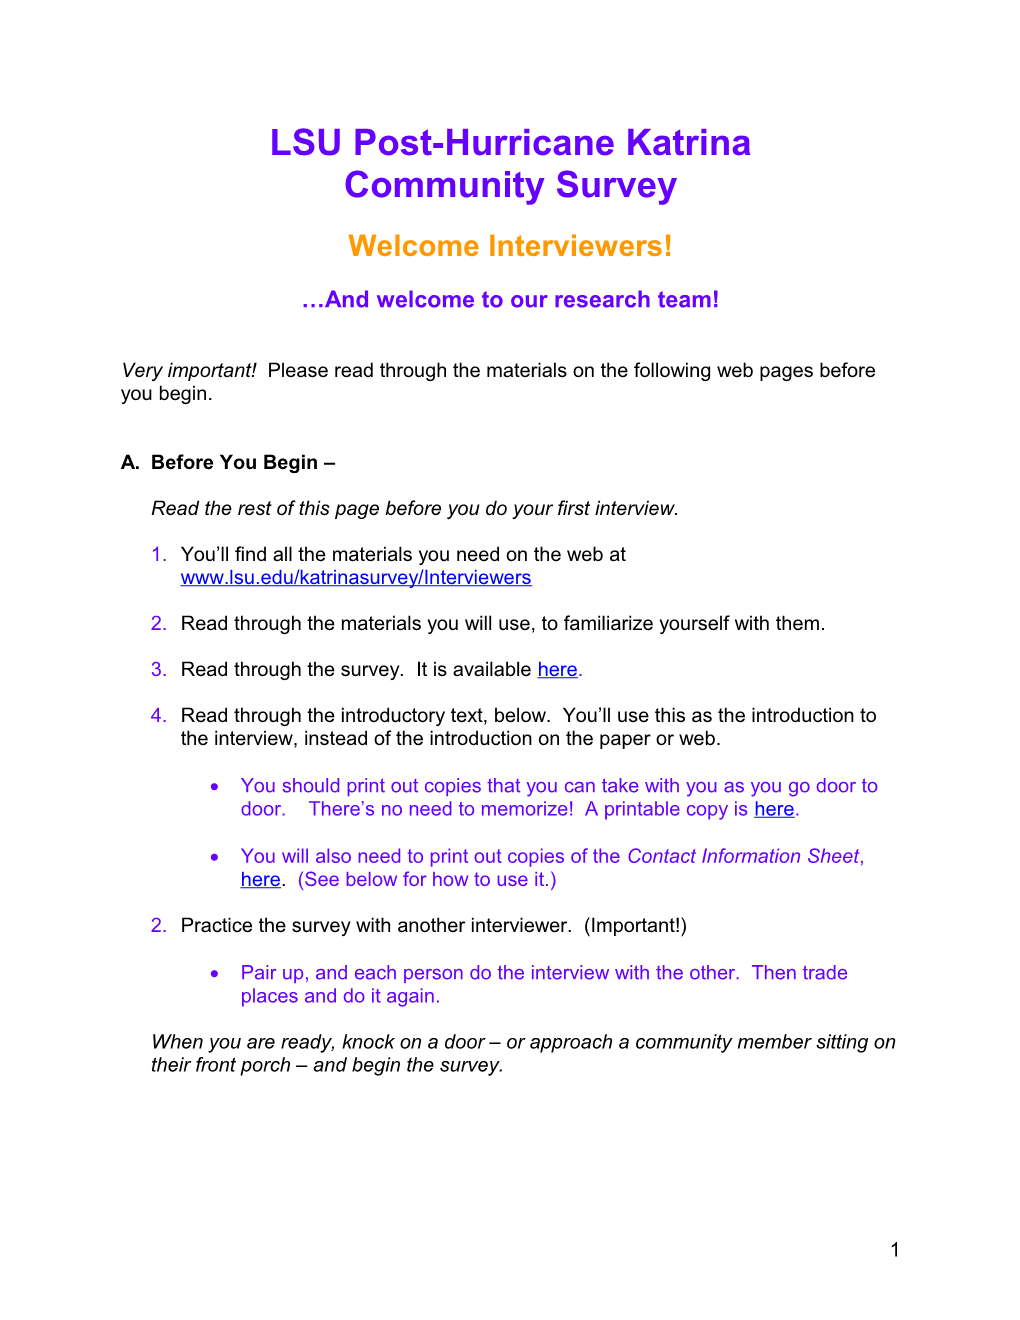 Example of an Introduction to the Survey That Could Be Customized